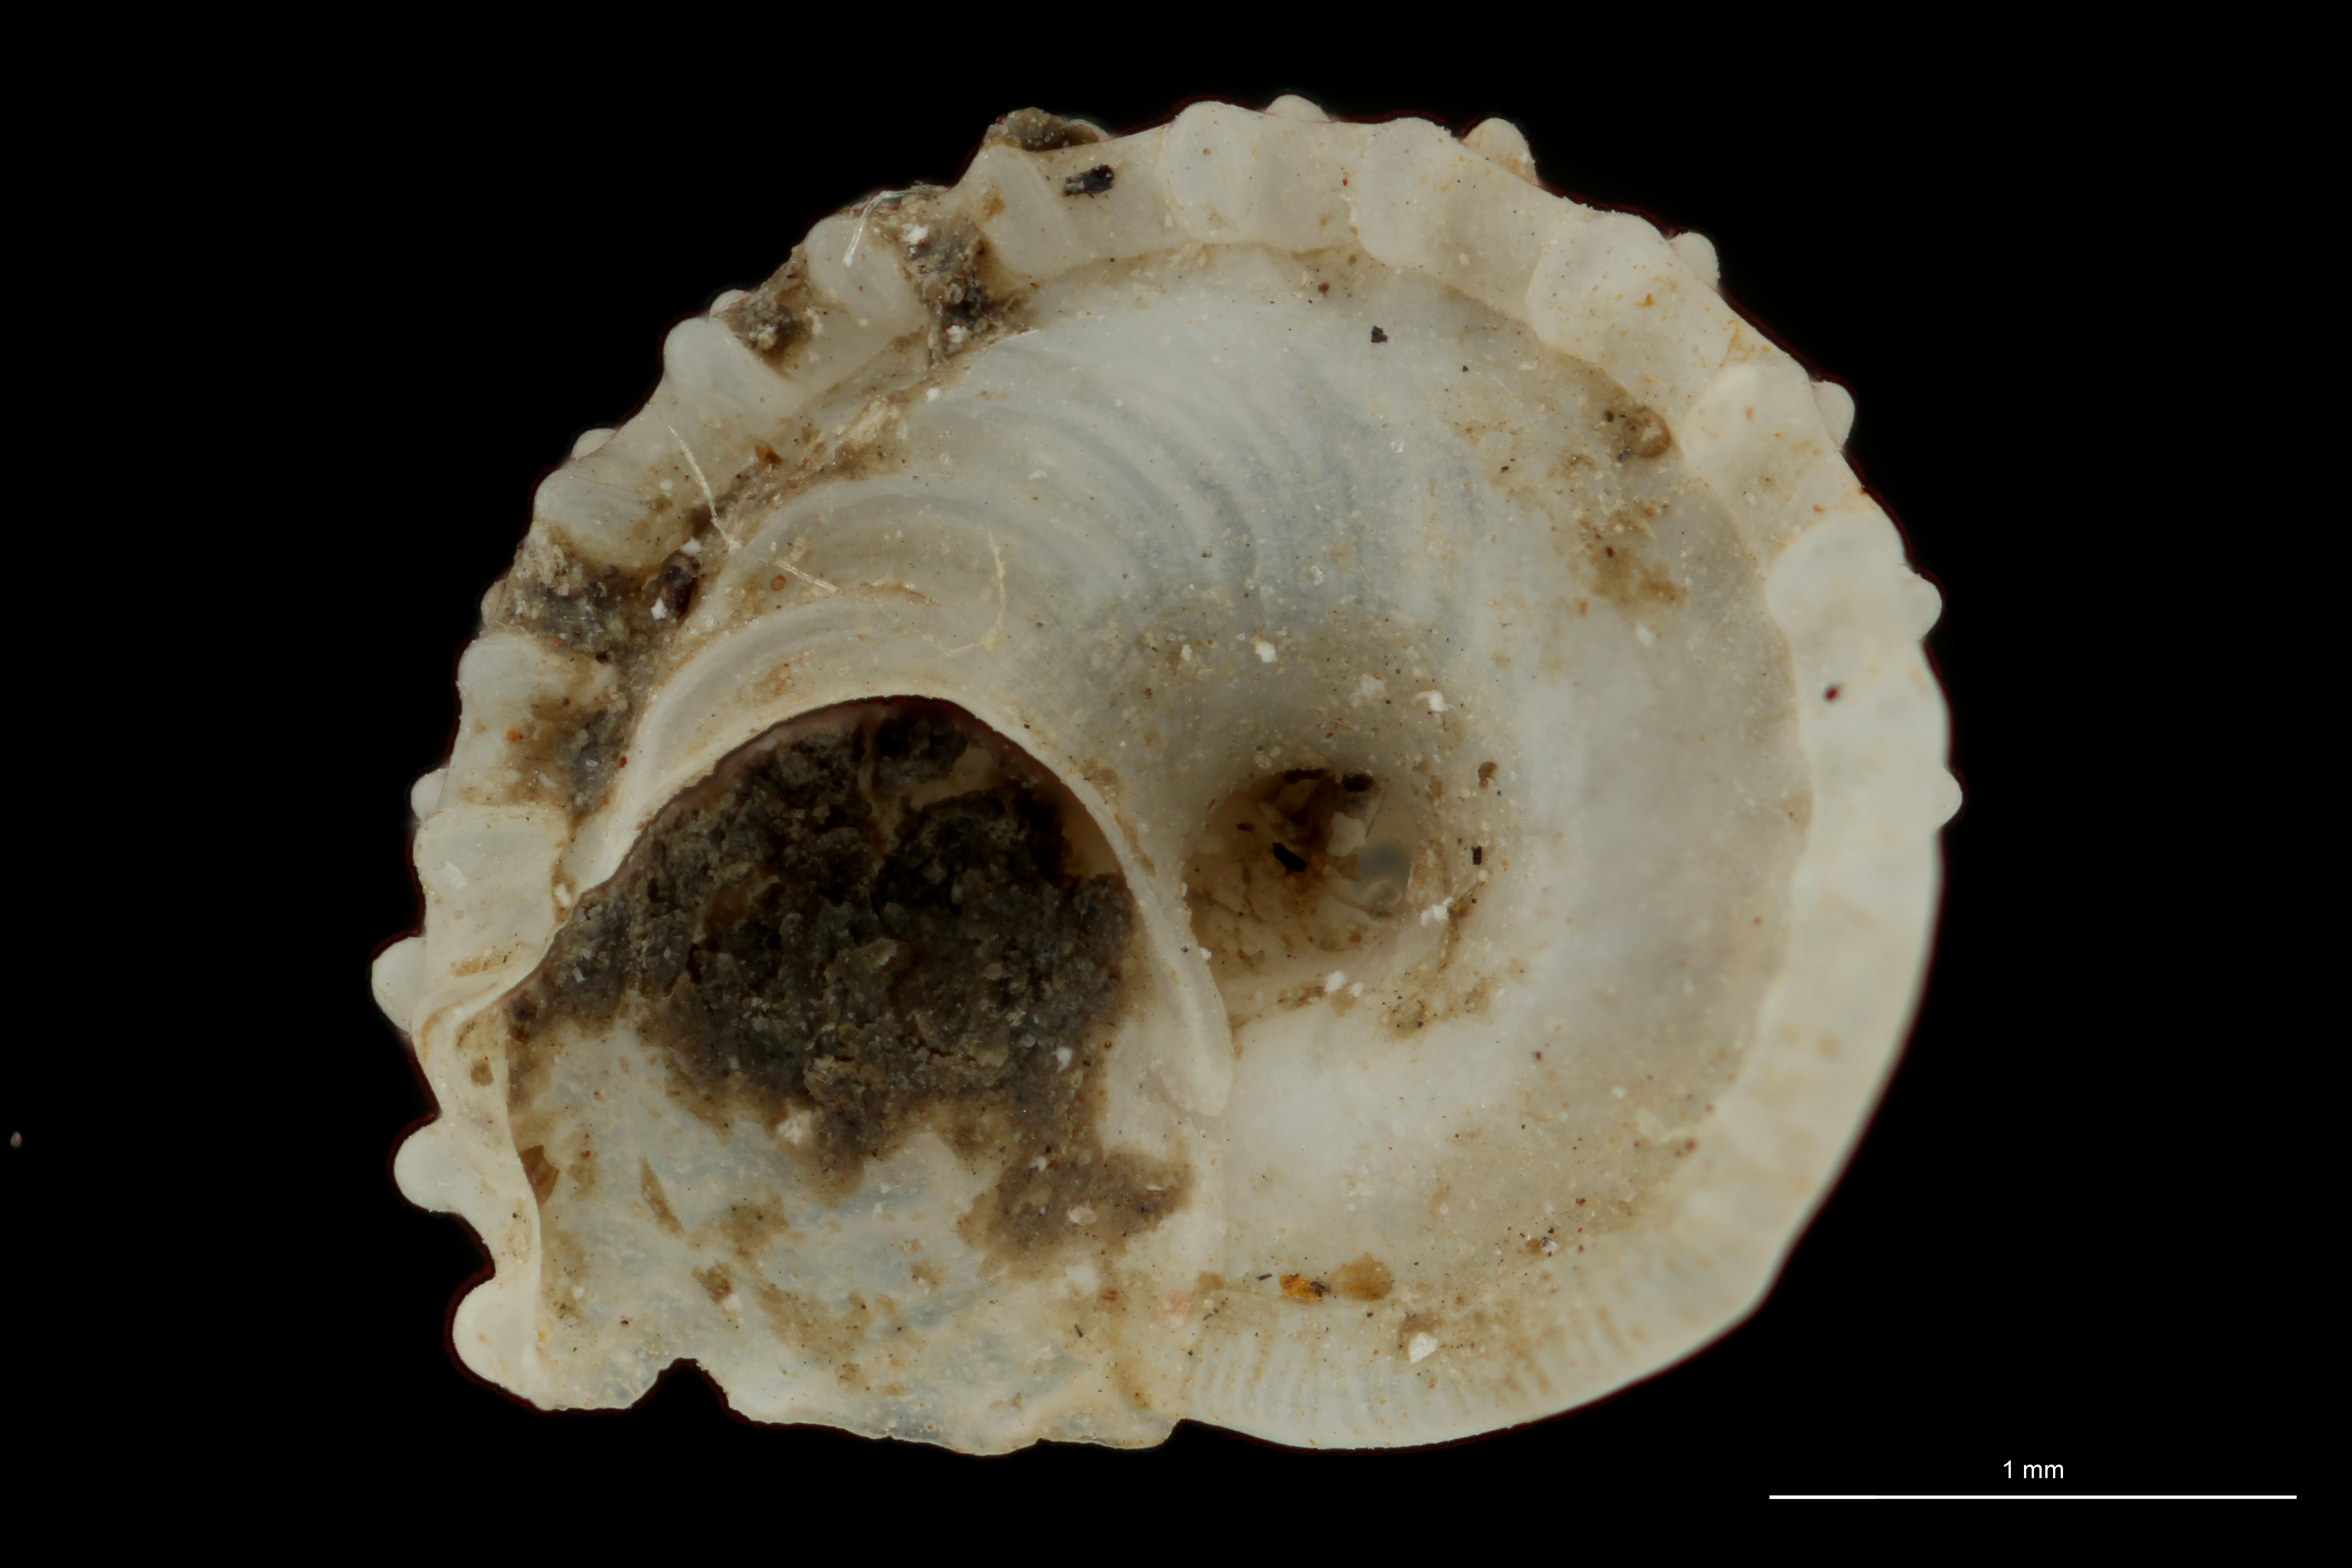 BE-RBINS-INV HOLOTYPE MT 95 Cochliolepis dautzenbergi VENTRAL ZS DMap Scaled.jpg